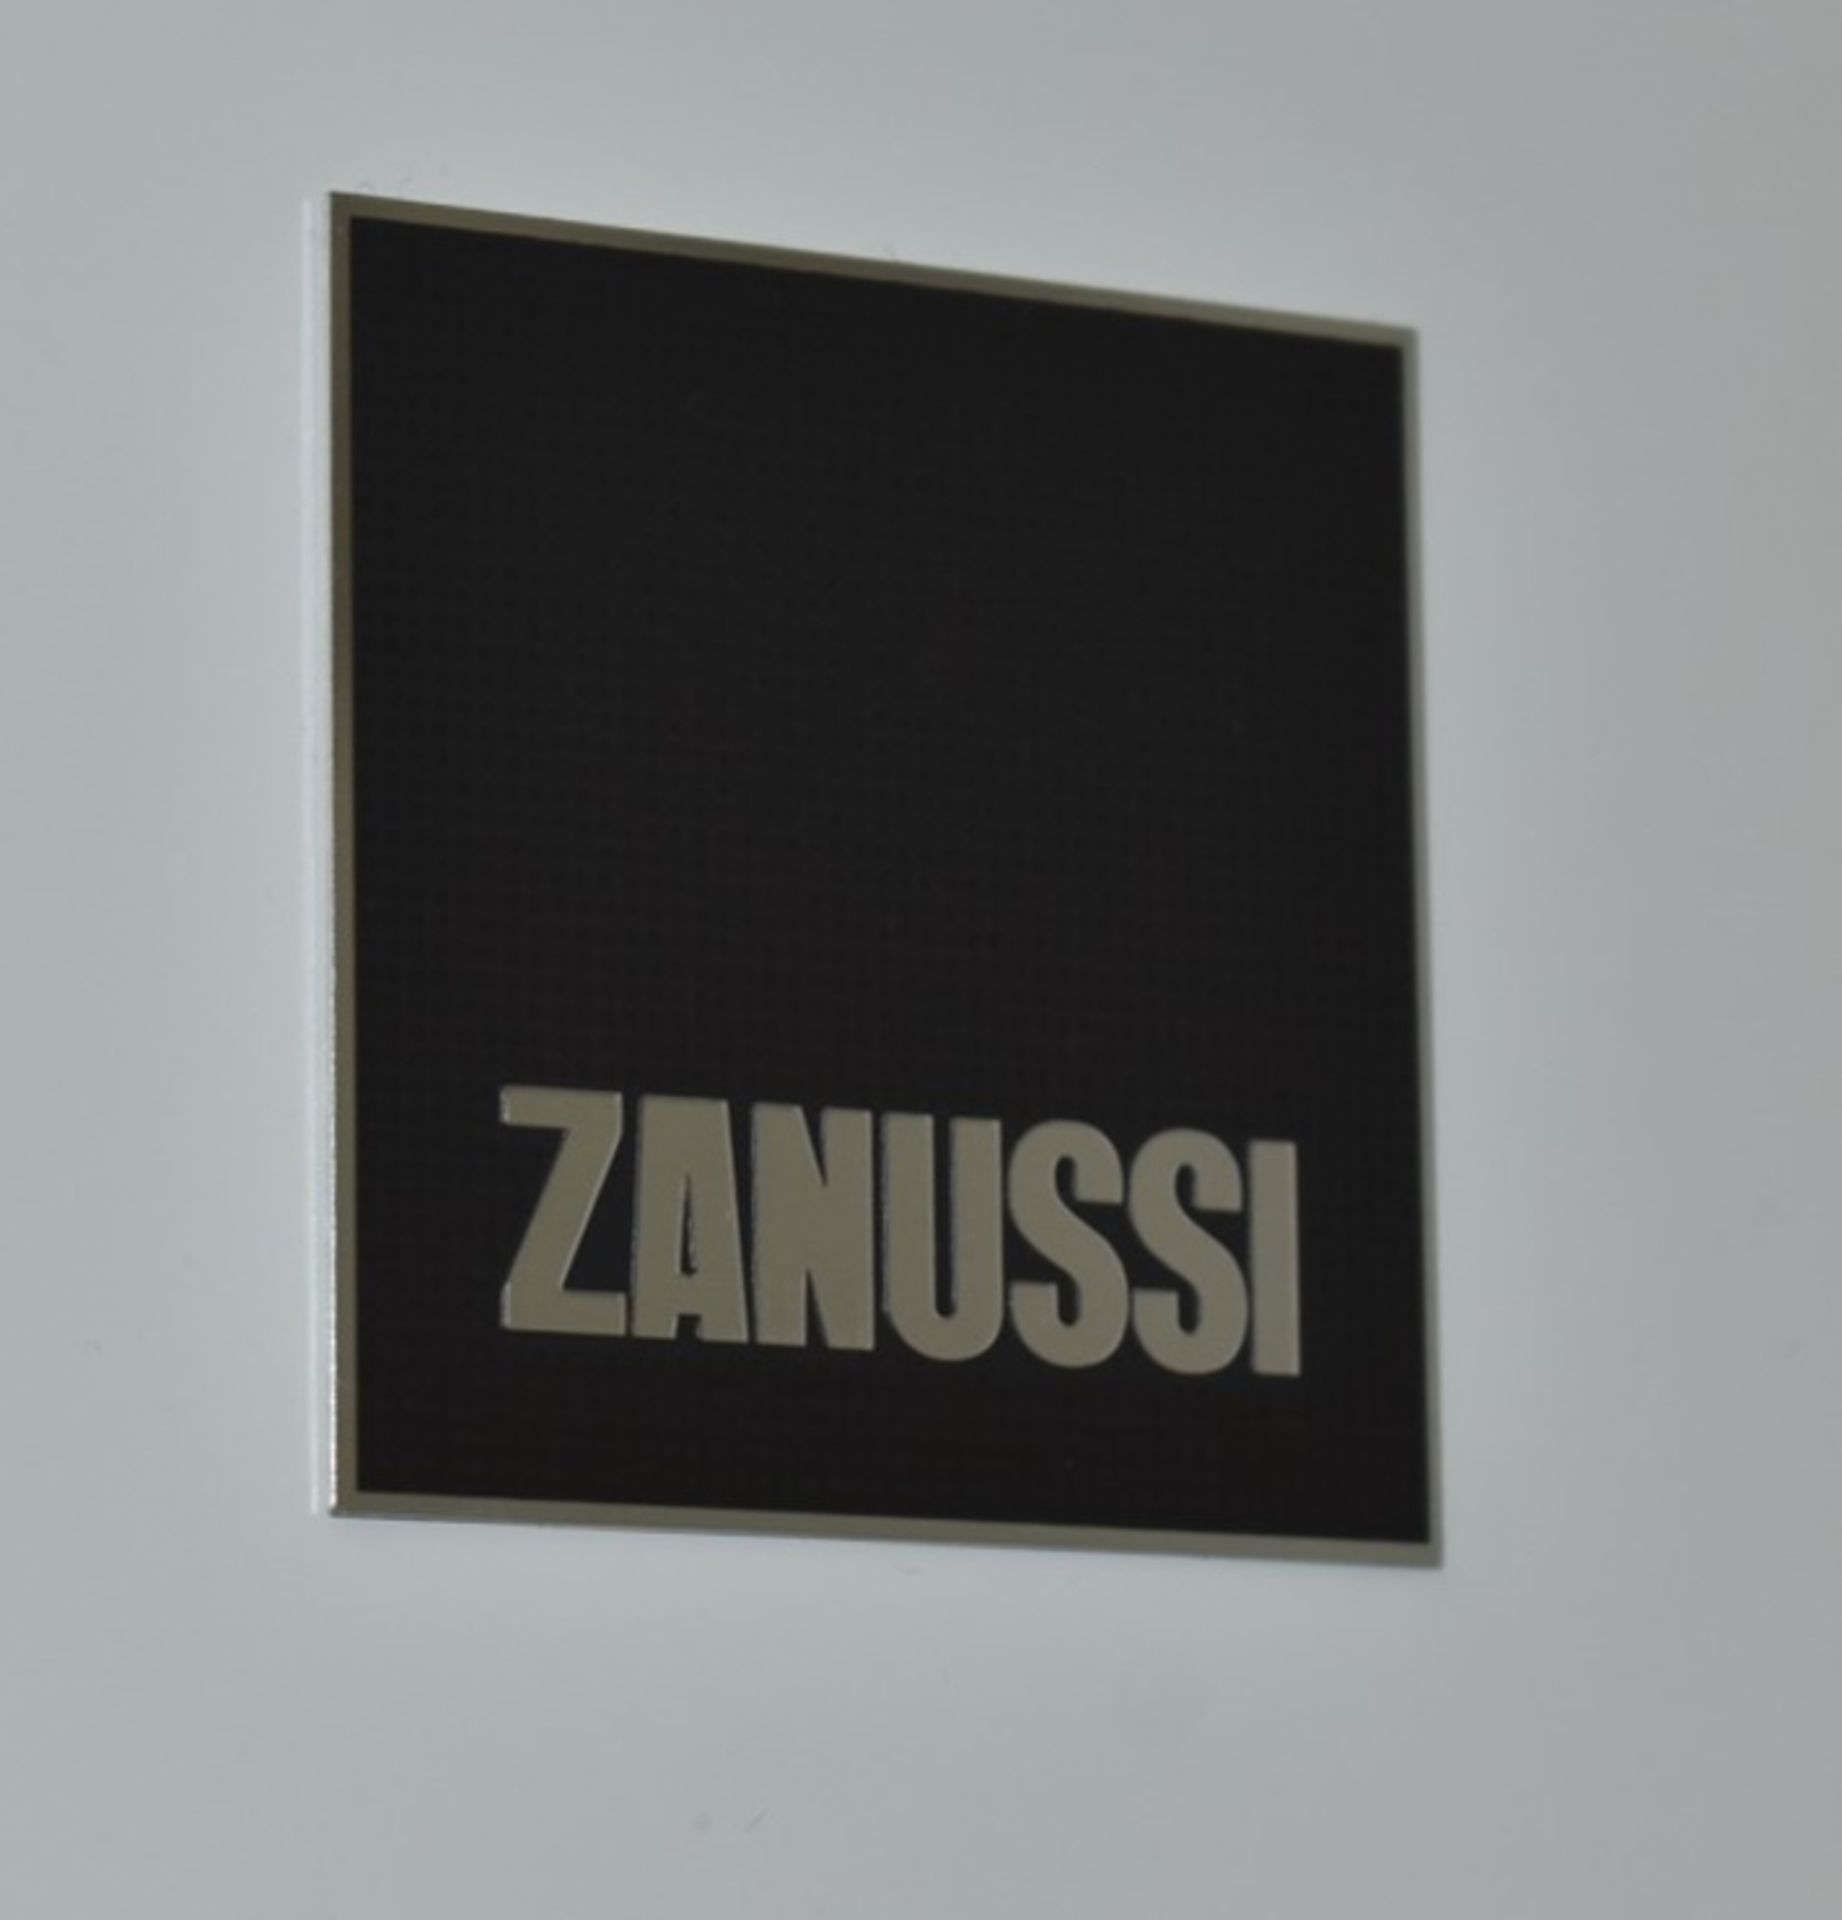 1 x Zanussi Upright Refrigerator - Dimensions: H186 x W60 x D90 cms - No VAT on the Hammer - CL641 - - Image 3 of 3